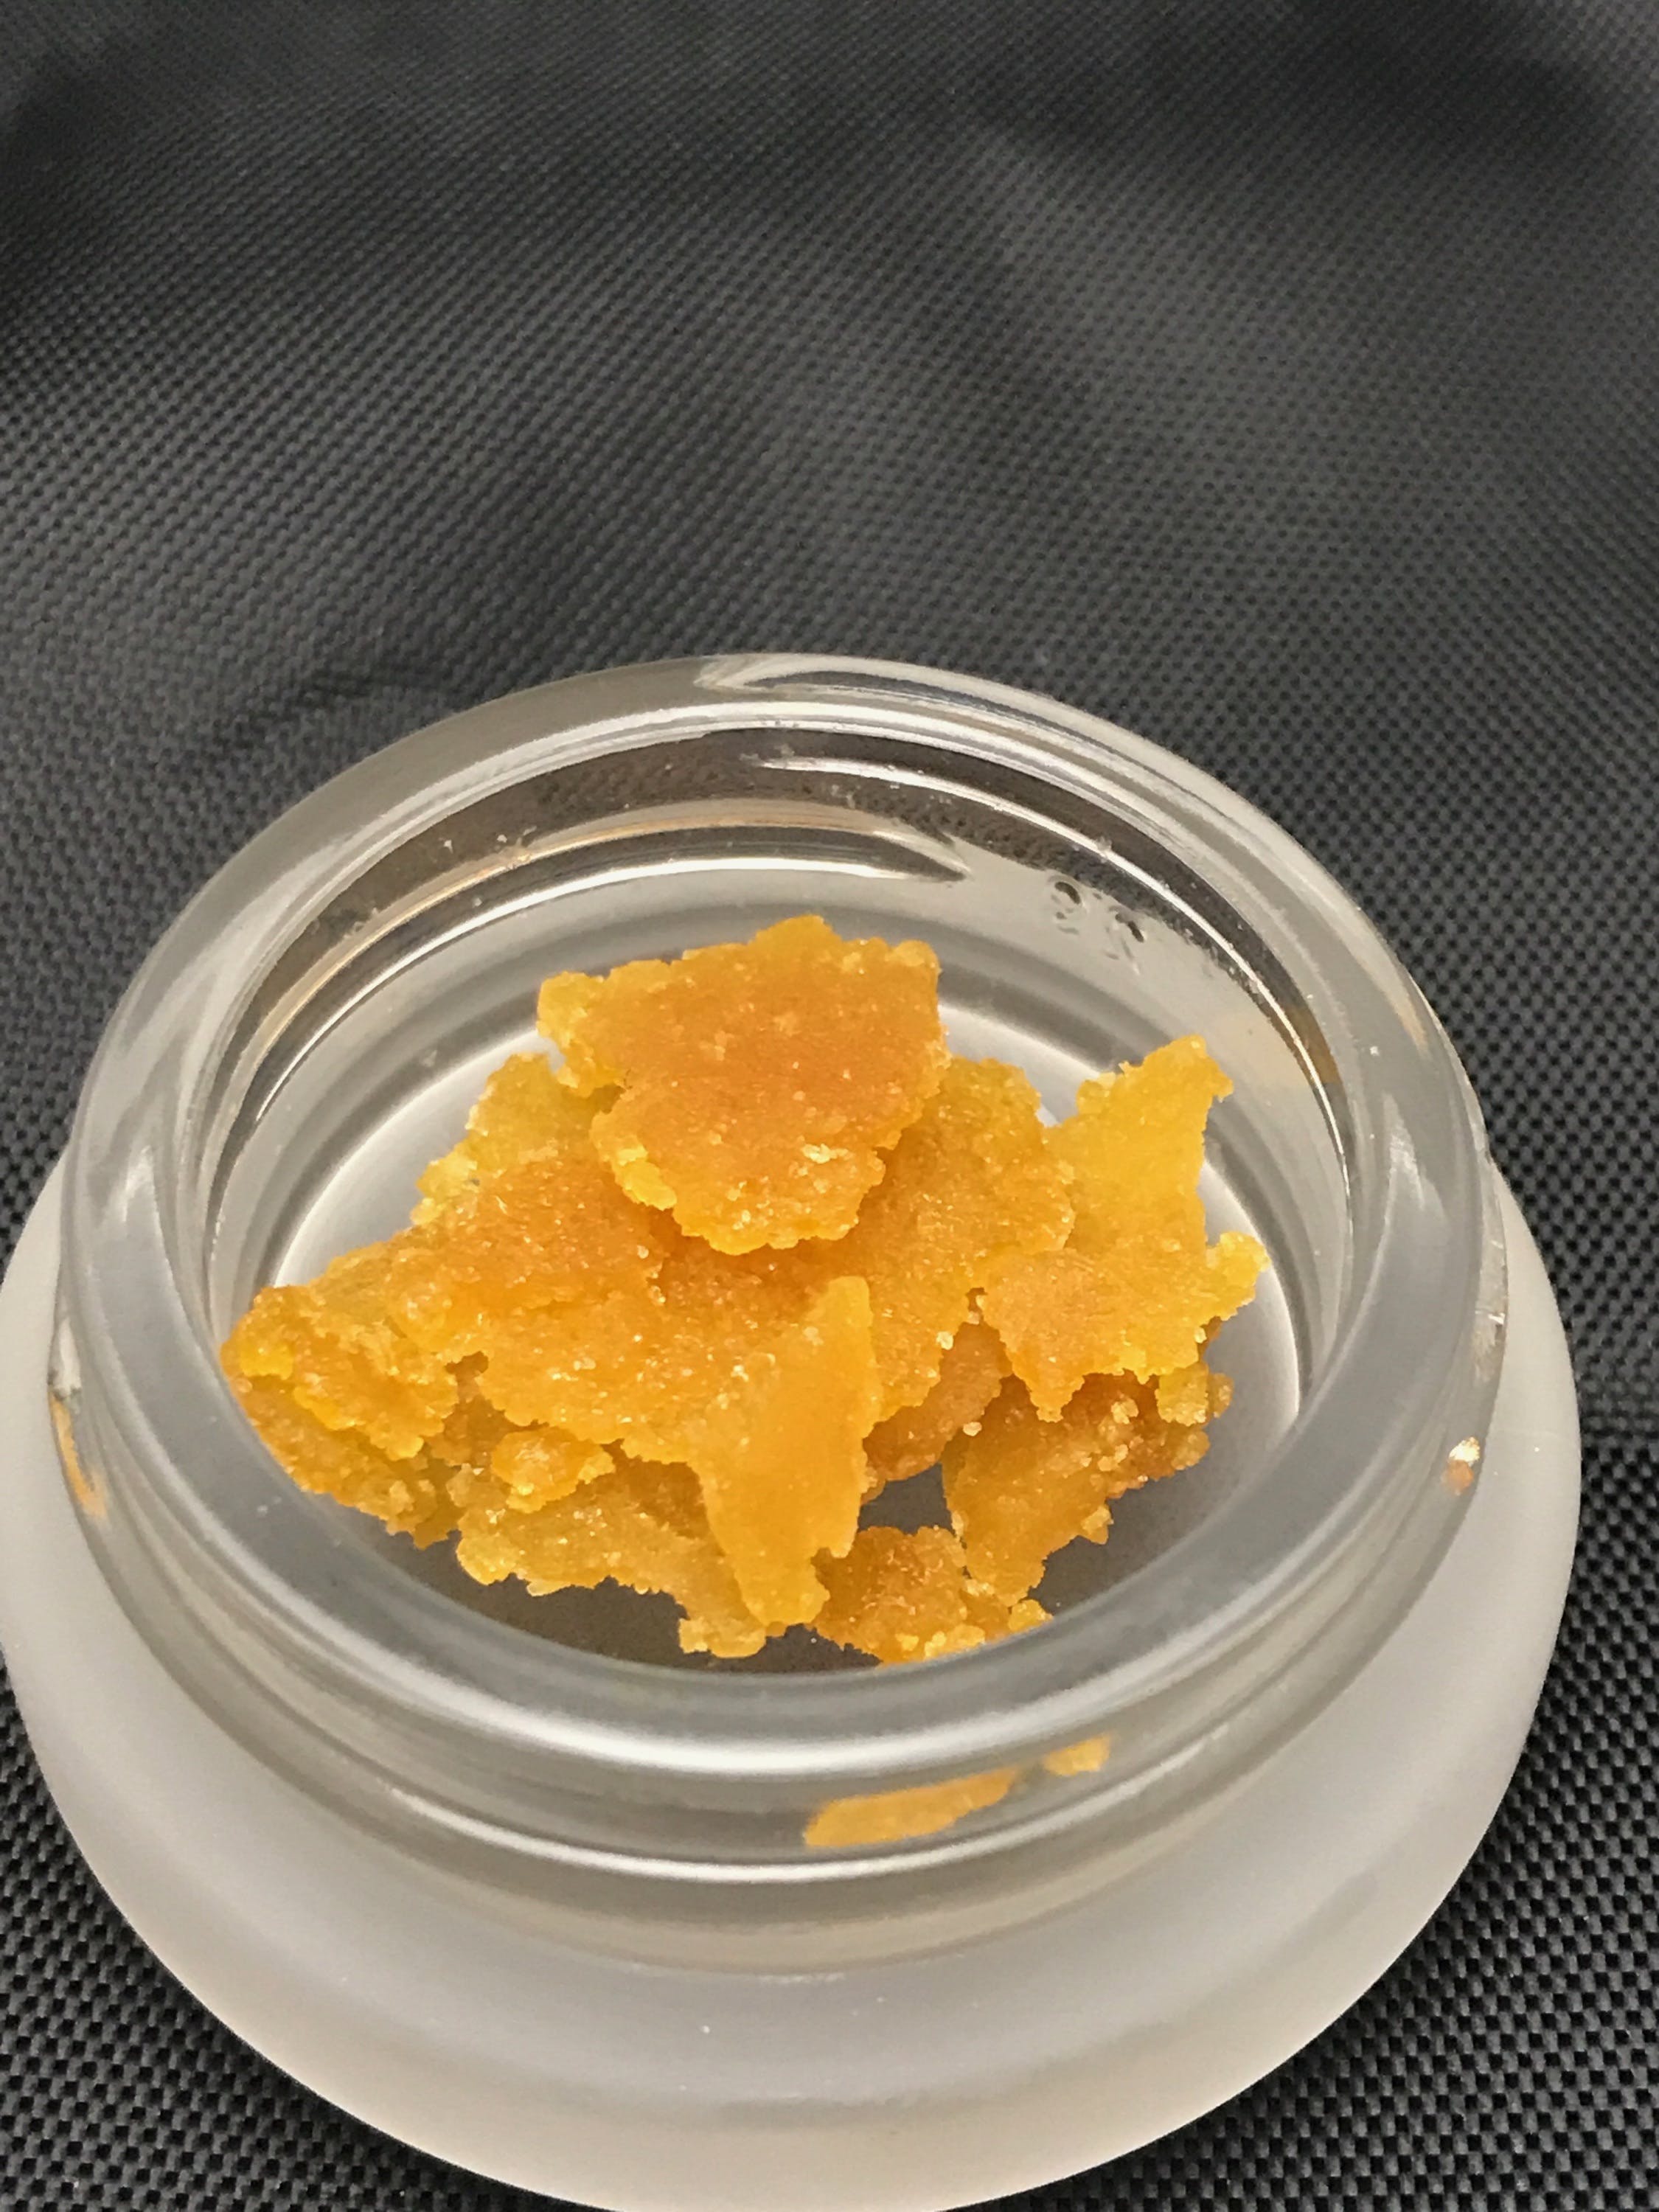 concentrate-infinite-sugar-wax-golden-goat